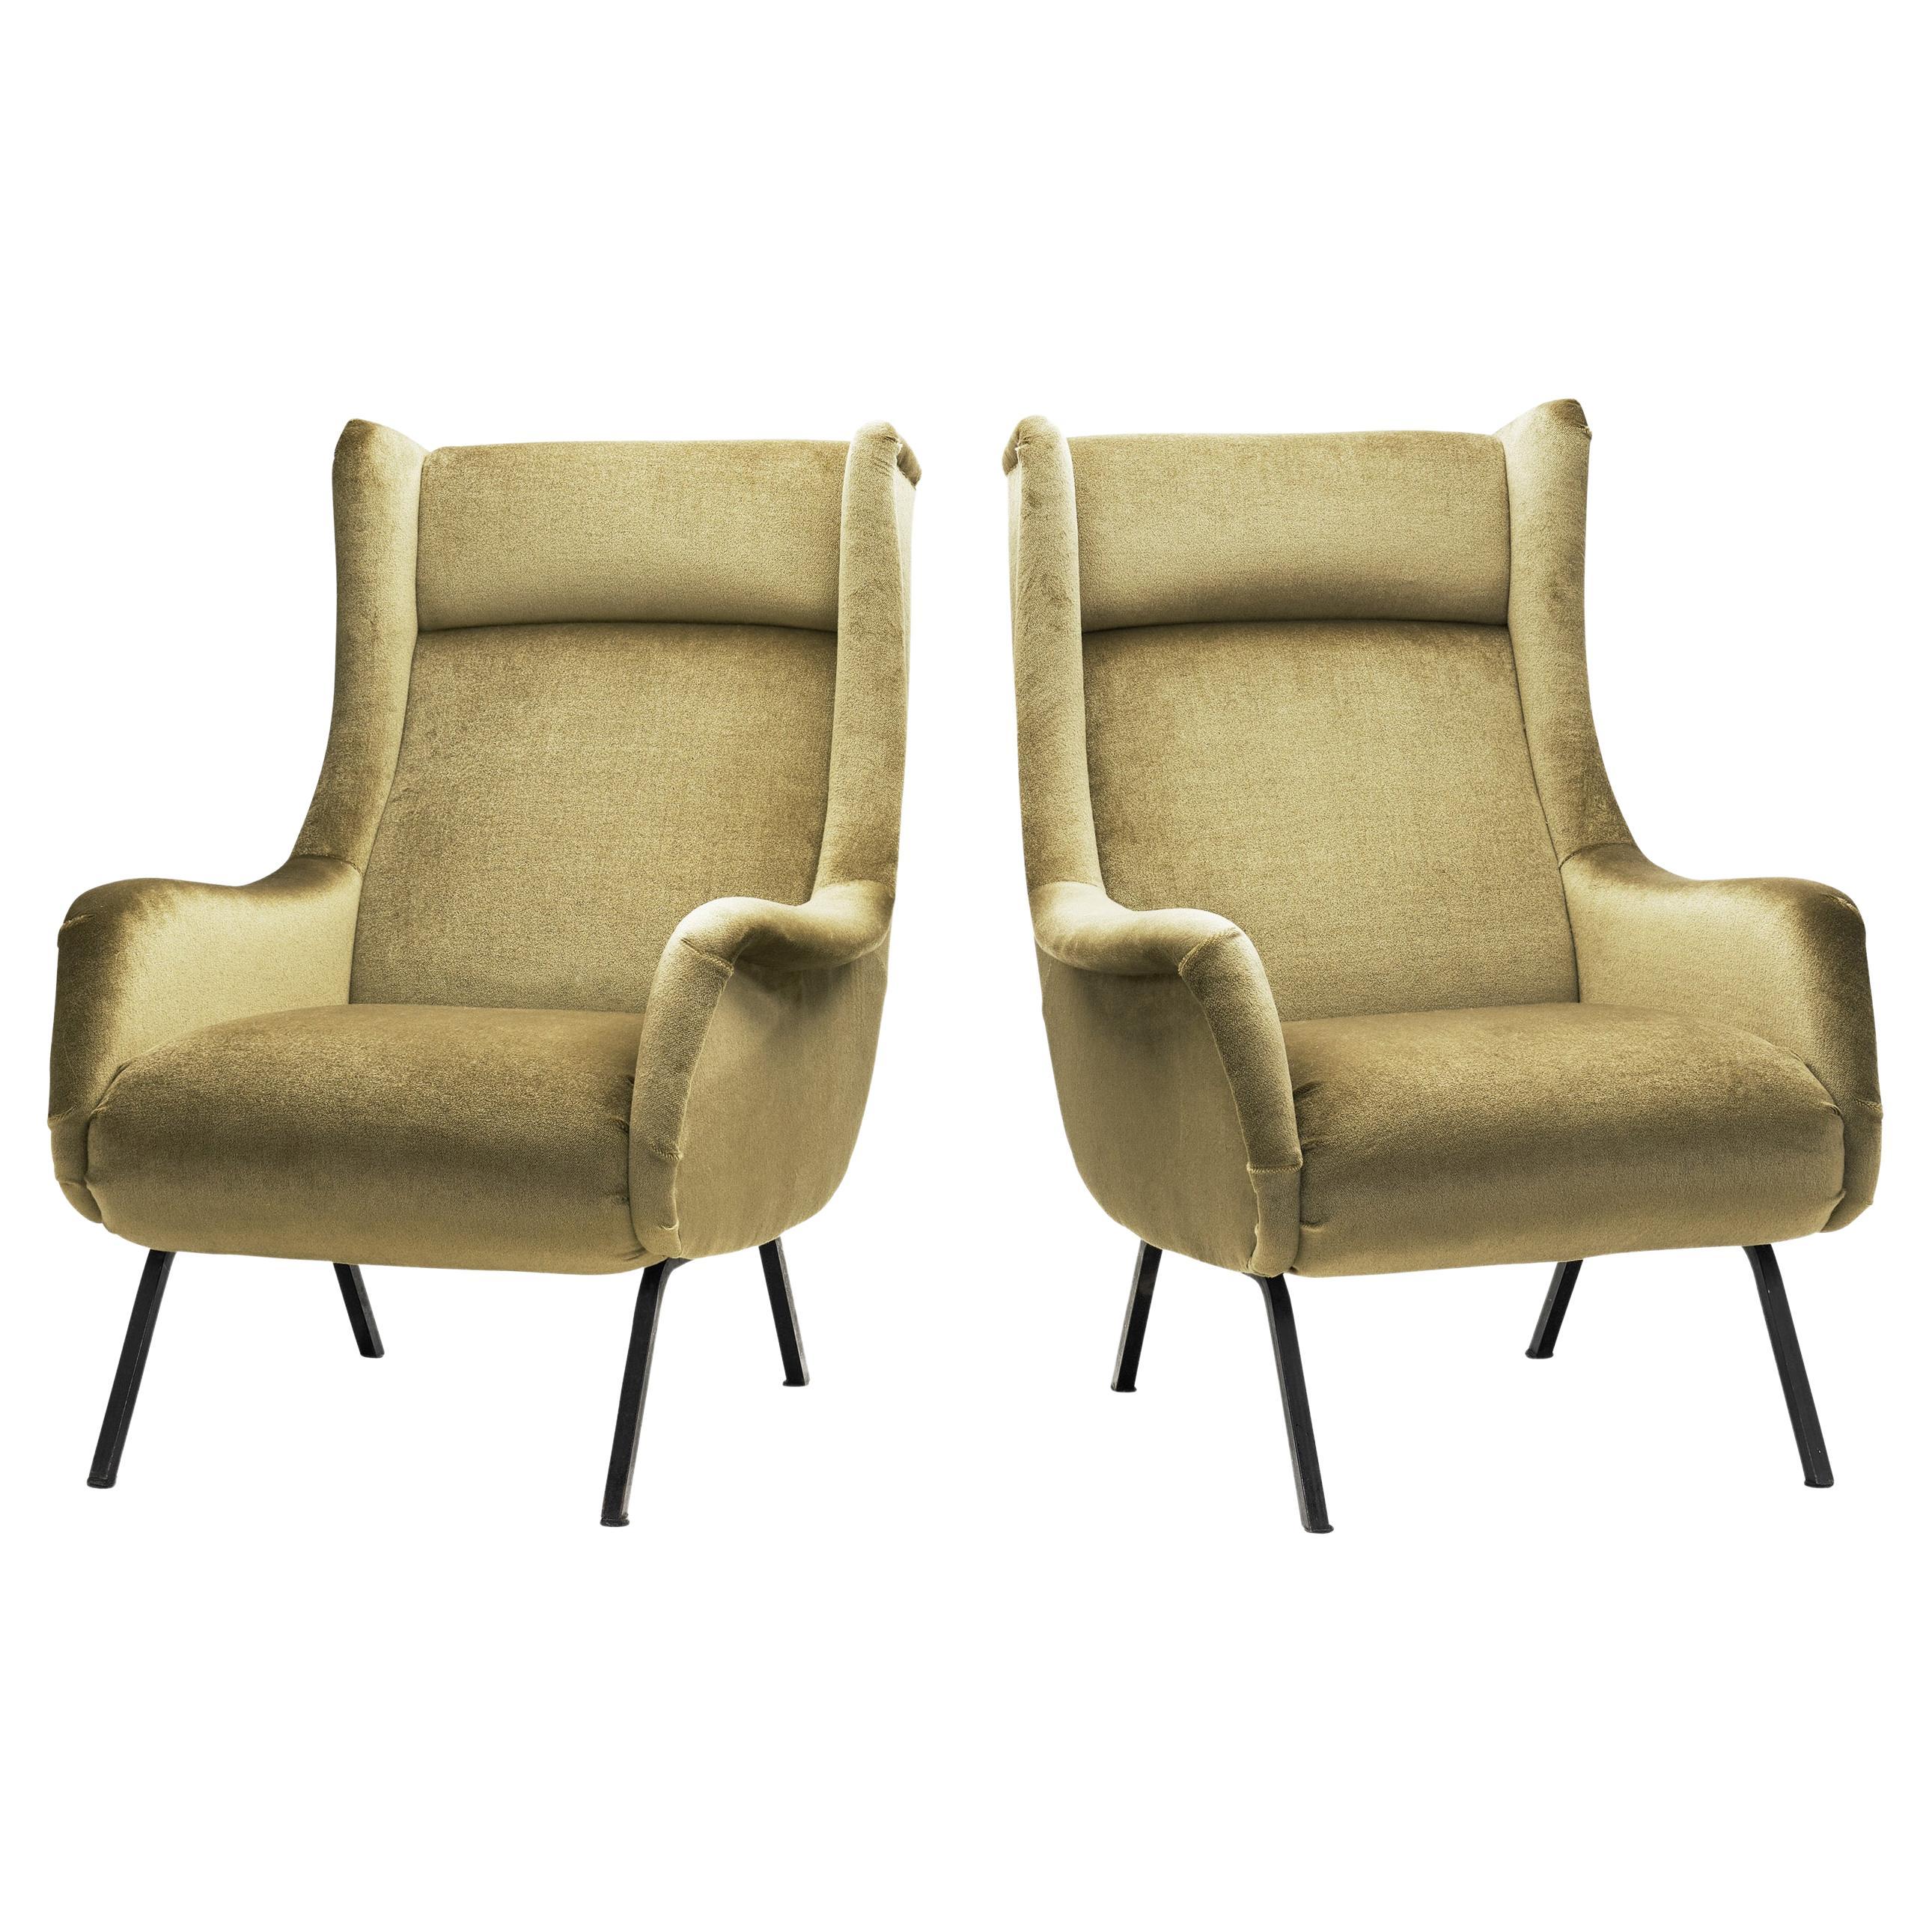 Italian Mid-Century Modern Armchairs in Velvet with Steel Frames, Italy 1960s For Sale